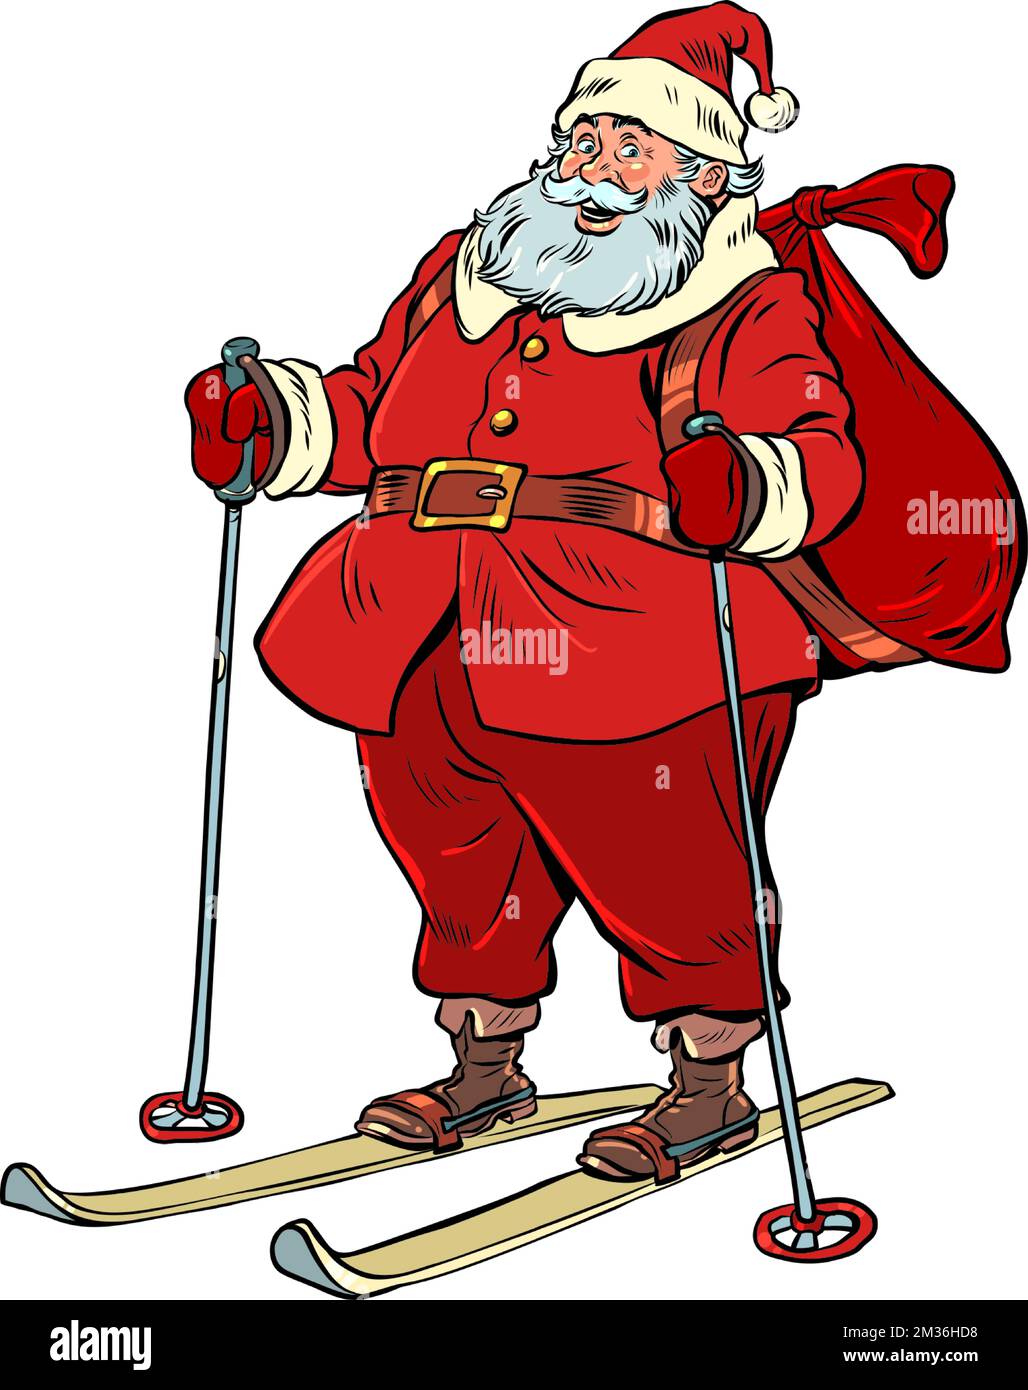 Santa Claus on skis Christmas and New Year. Red suit and big bag with gifts, holiday character Stock Vector